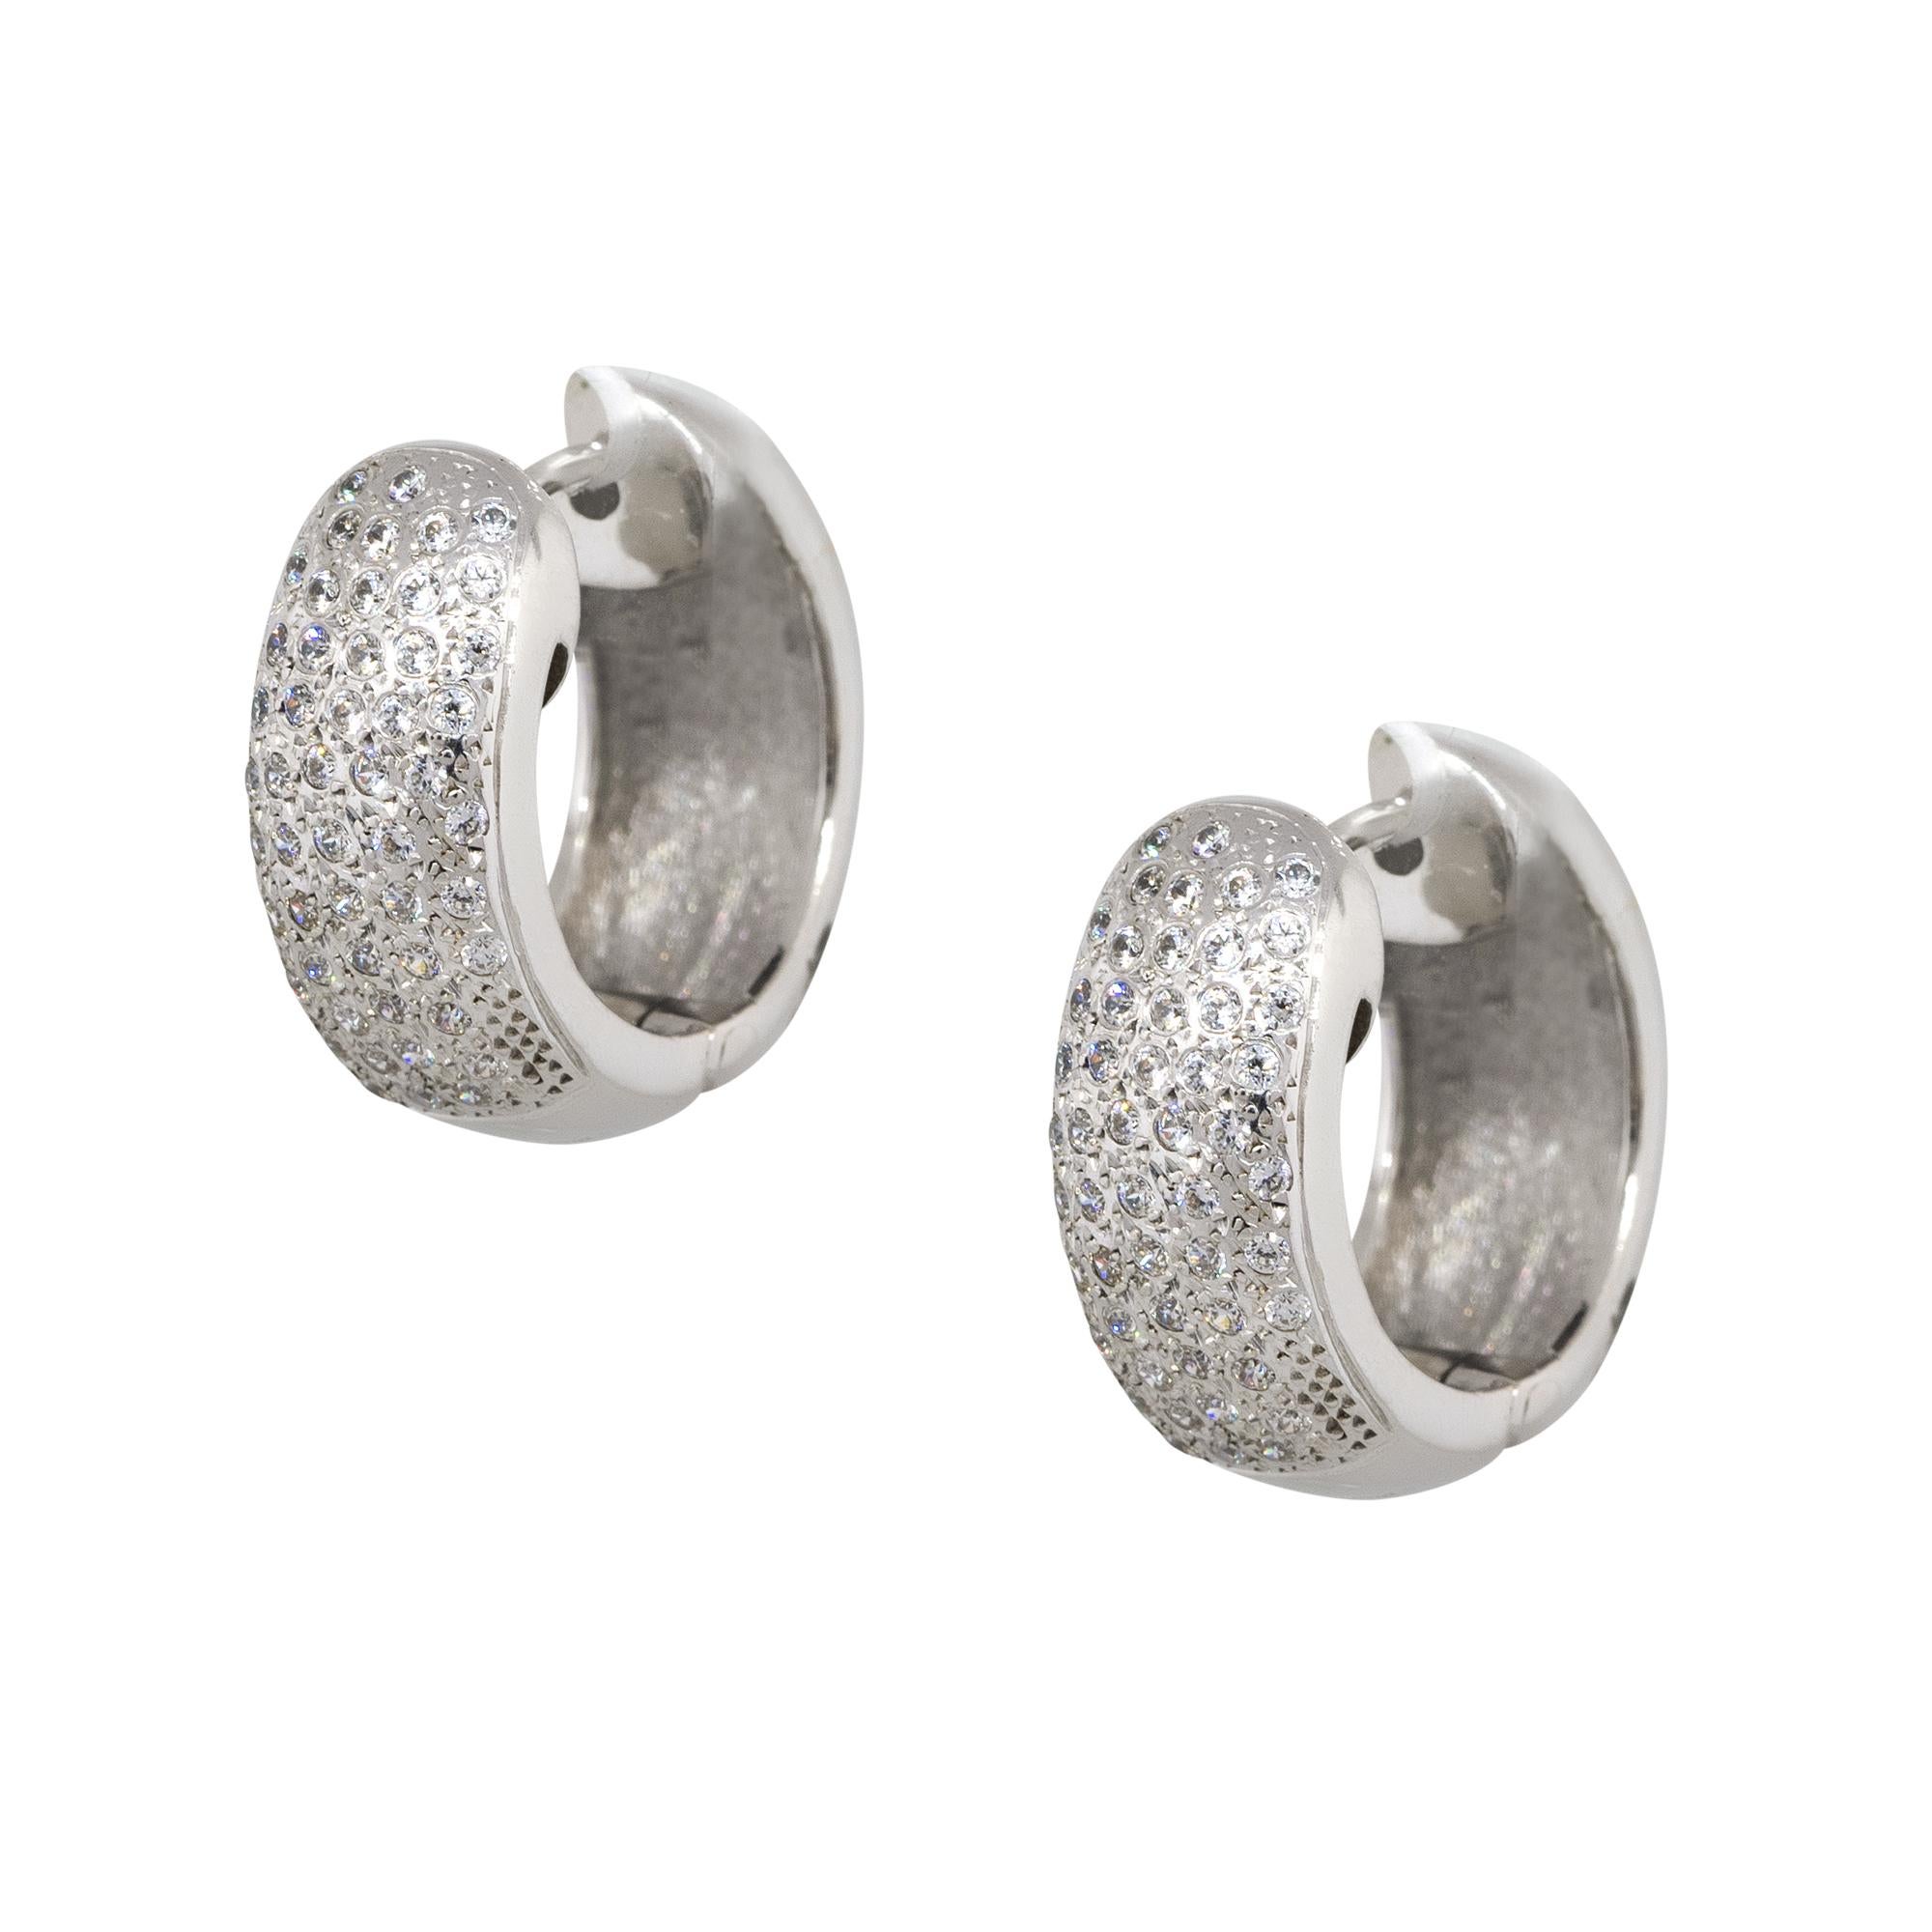 Style: Huggie Earrings
Material: 14k white gold
Diamond Details: Approx. 0.94ctw of round cut diamonds. Diamonds are G/H in color and VS in clarity.
Fastening: Hinged backs
Weight: 11.2g (7.2dwt) 
Earring Measurements: 19mm x 8mm x 18mm
Comes with: